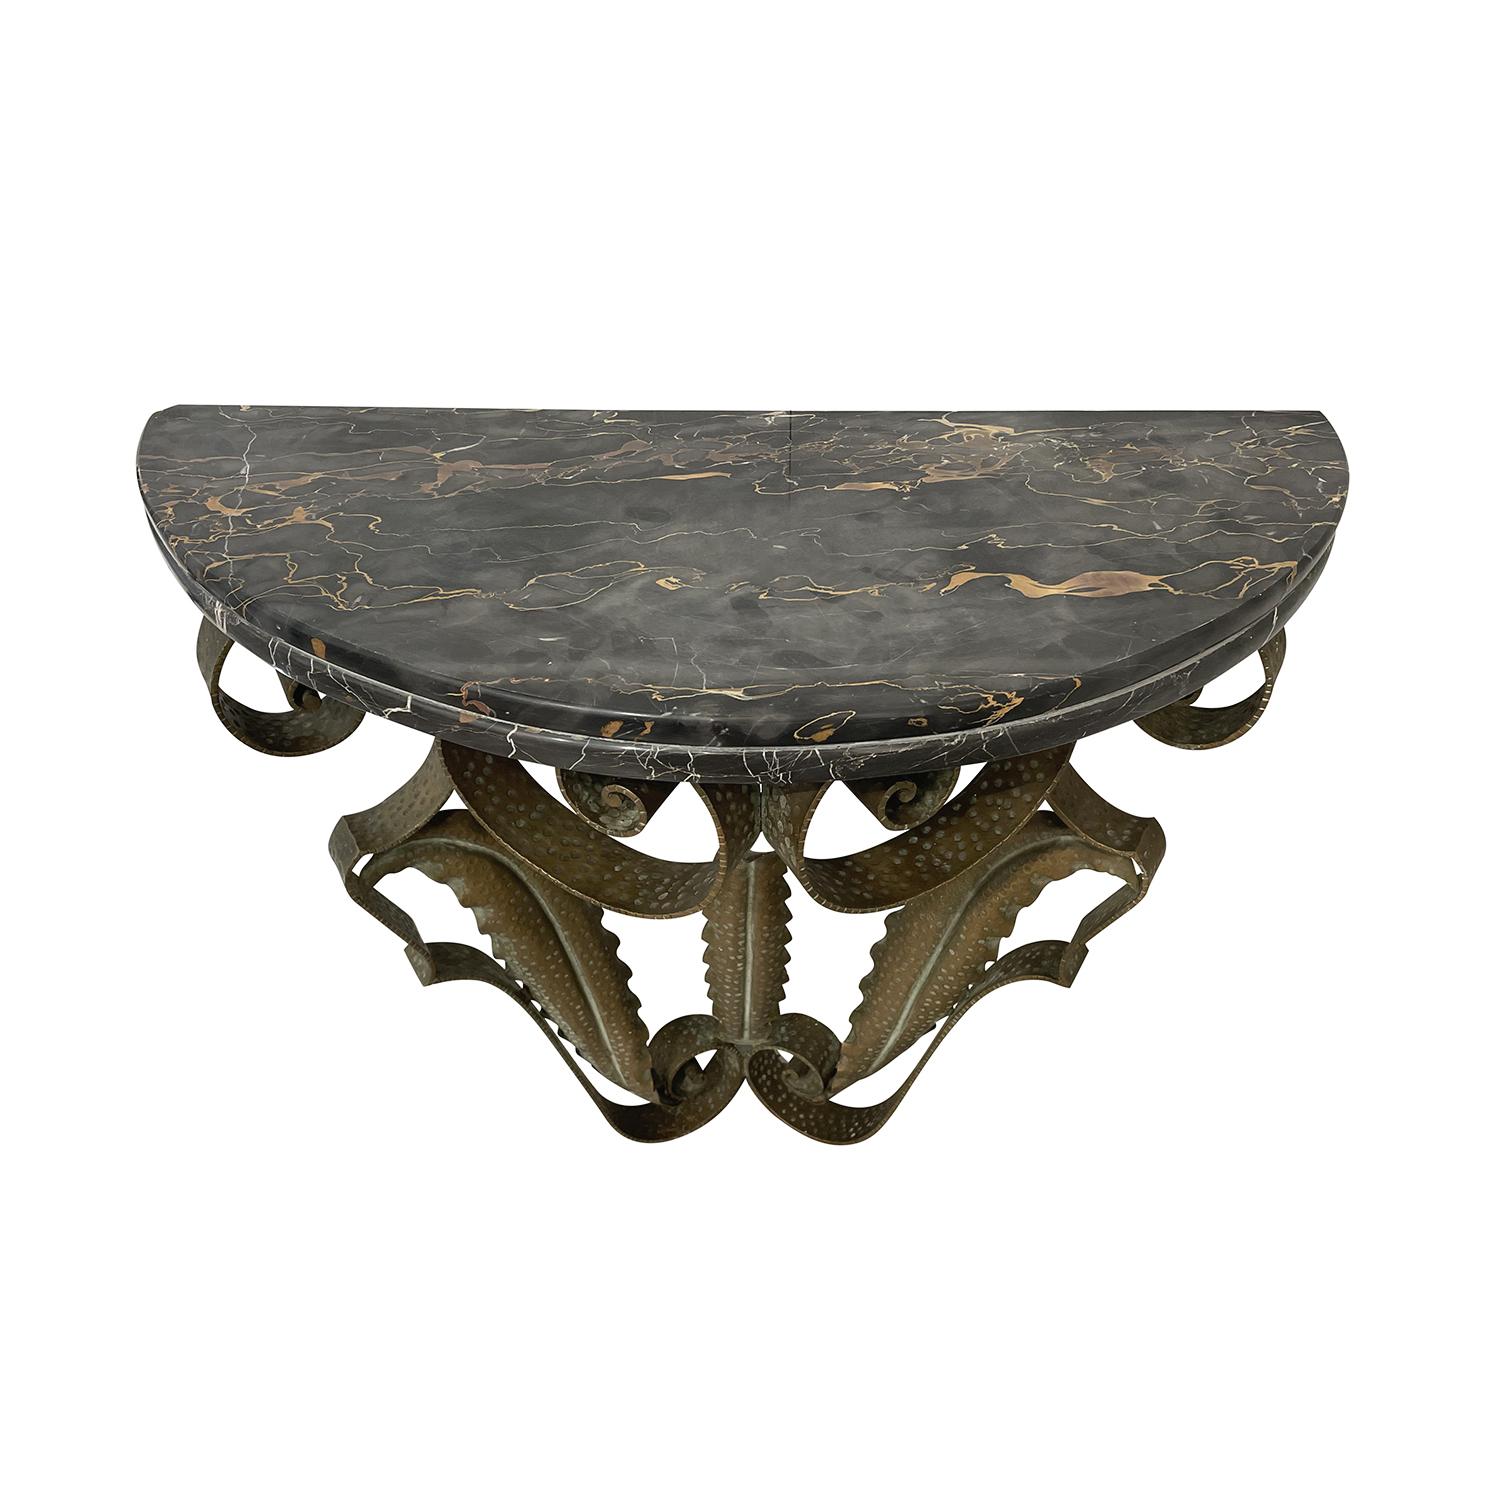 A half round, vintage Mid-Century Modern Italian wall mounted console table made of handcrafted gilded metal with a black marble top, designed by Pier Luigi Colli, in good condition. The small demilune side table is enhanced by detailed decoration